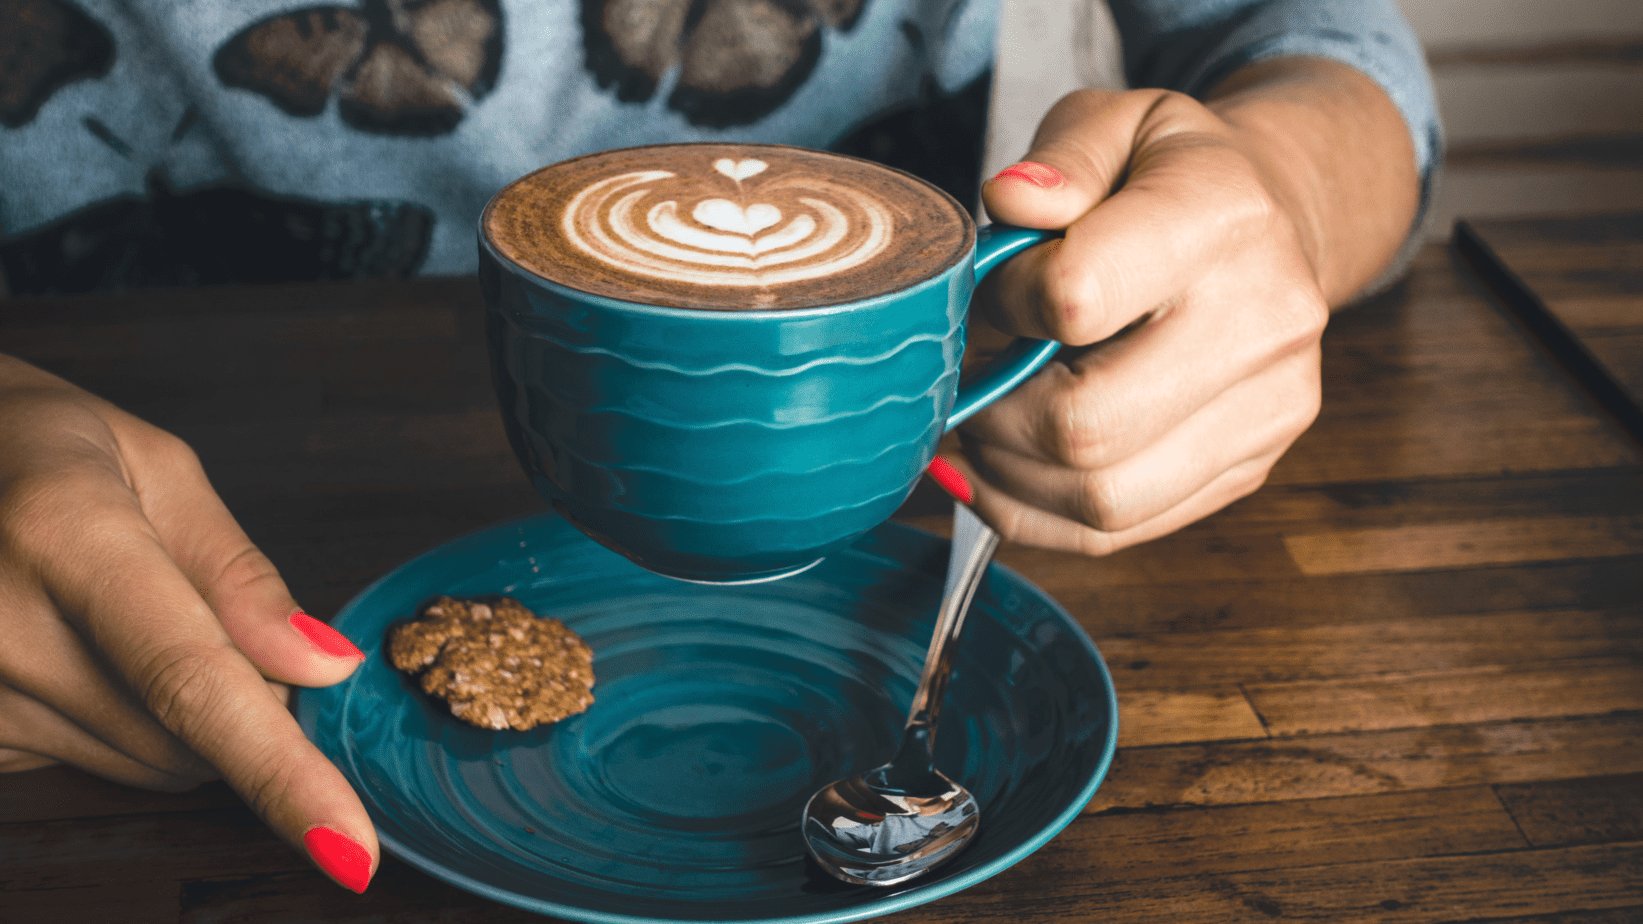 Savor The Soothing Sips: Top 10 Low-caffeine Coffee For A Calm Caffeine Fix